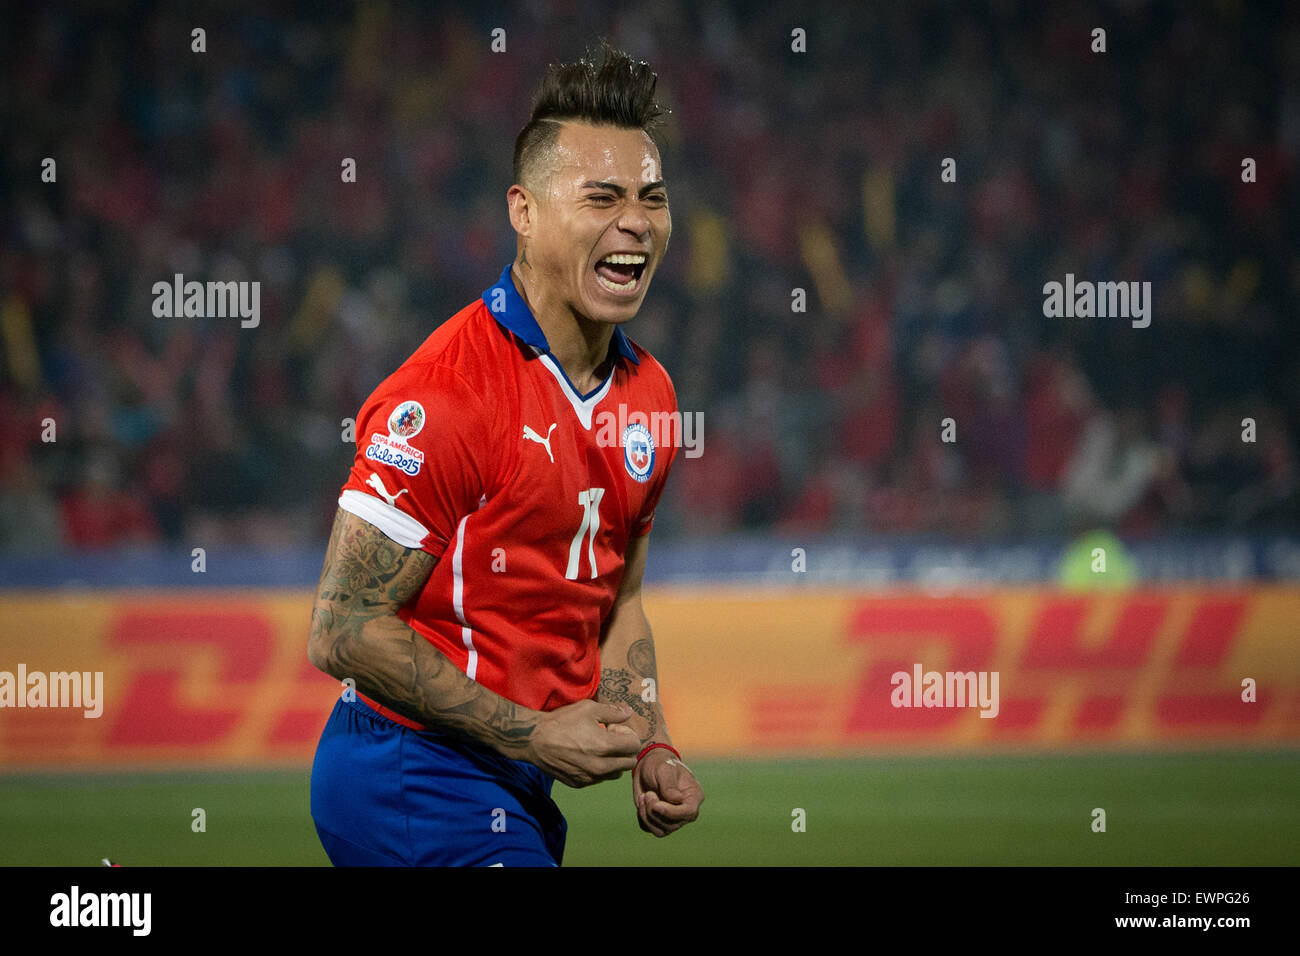 Santiago, Chile. 29th June, 2015. Eduardo Vargas from Chile celebrates scoring against Peru during the Copa America Chile 2015 semifinal match, held at National Stadium, in Santiago, Chile, on June 29, 2015. Chile won 2-1 Credit:  Pedro Mera/Xinhua/Alamy Live News Stock Photo